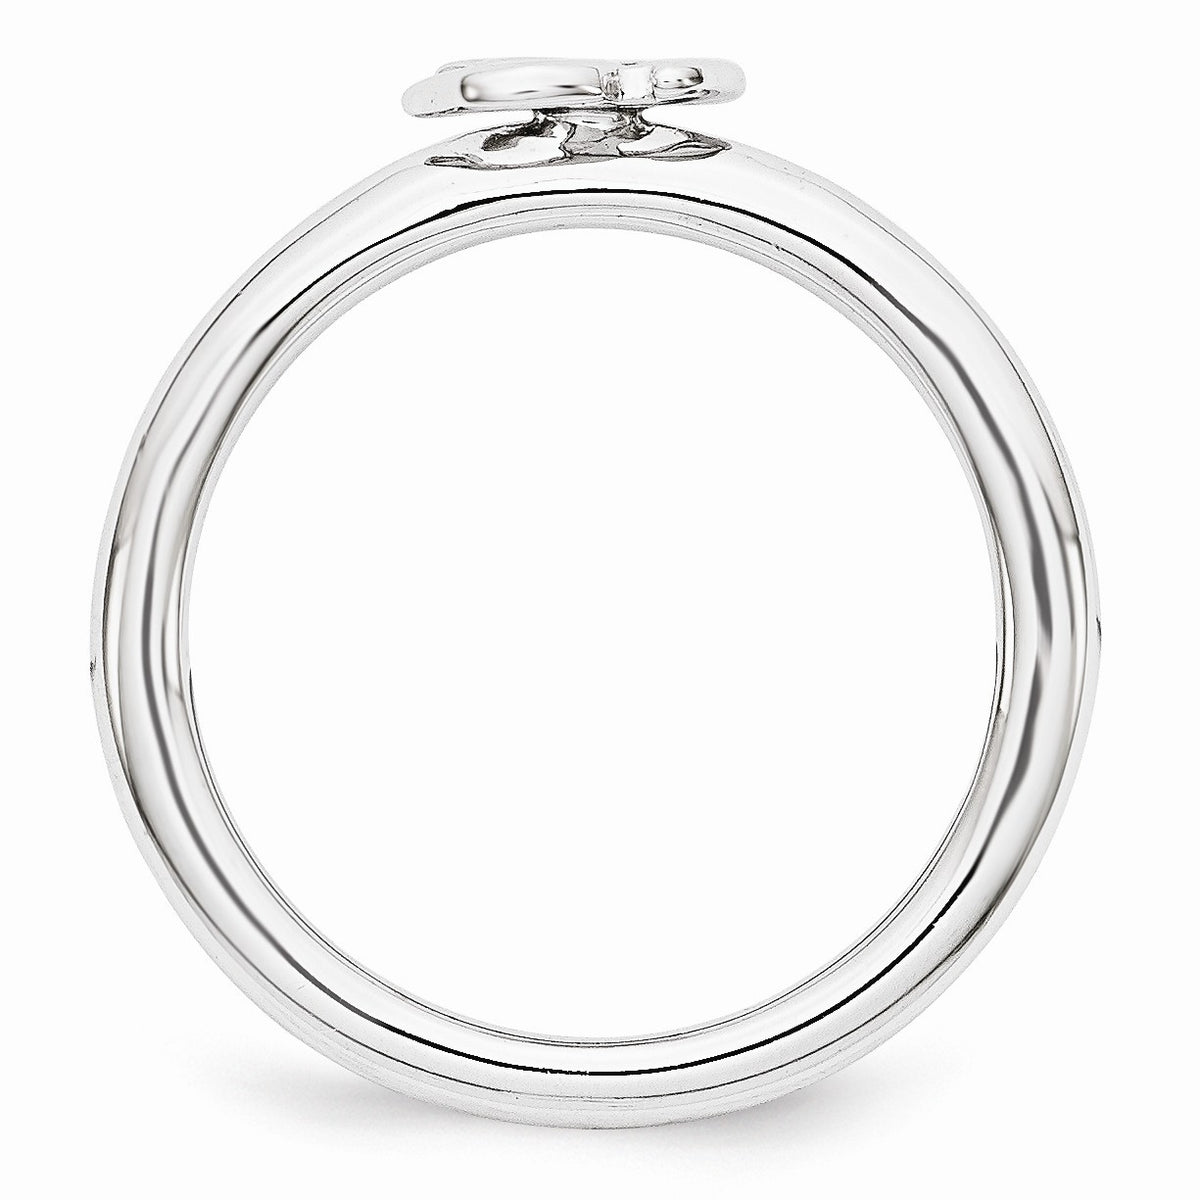 Alternate view of the Rhodium Plated Sterling Silver Stackable 7mm Ohm Symbol Ring by The Black Bow Jewelry Co.